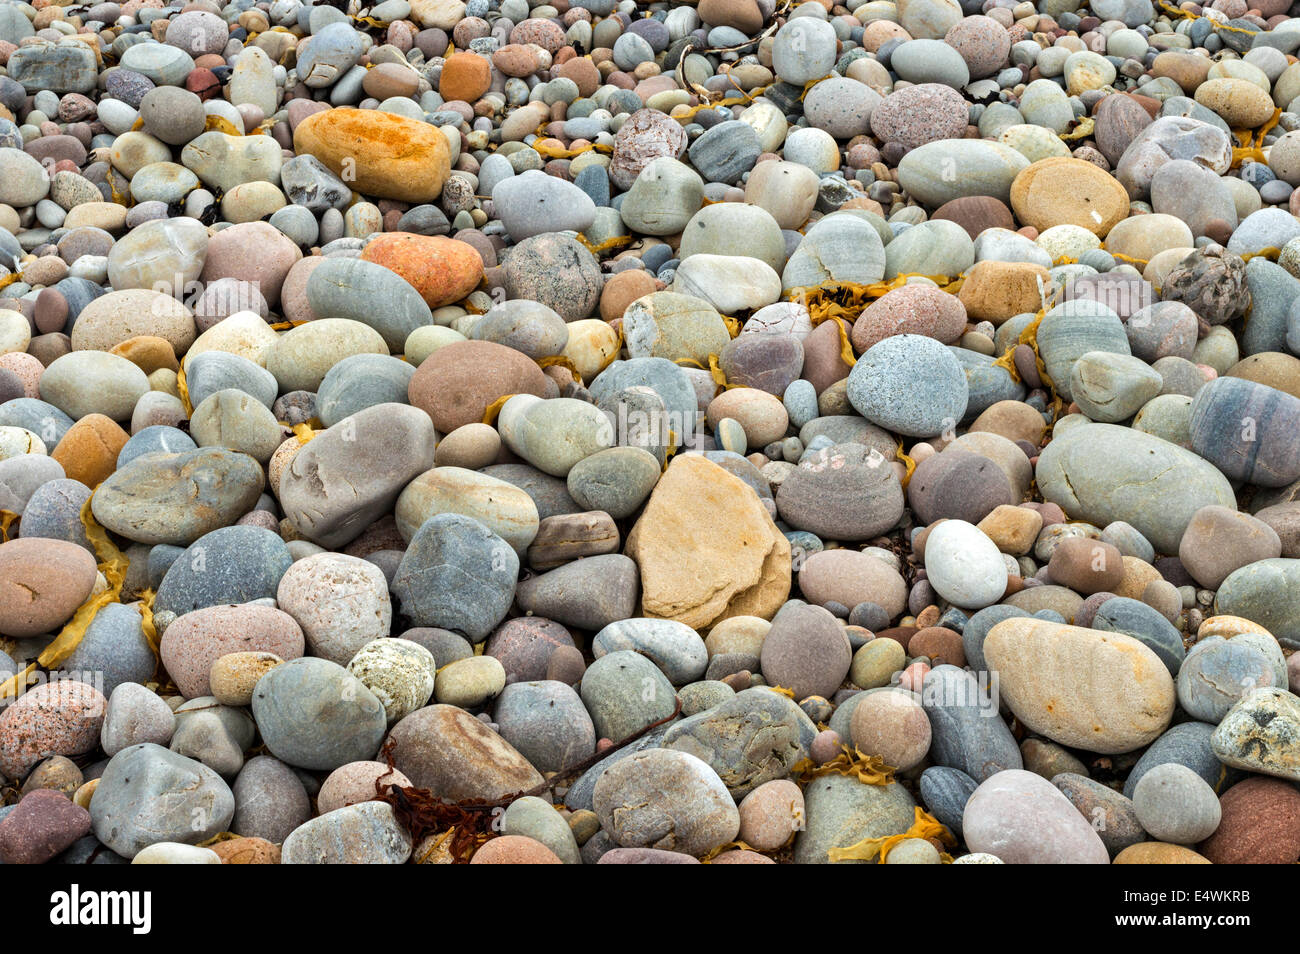 BEACH STONES OF MANY COLOURS SOME OF THEM ARE SANDSTONE WASHED SMOOTH BY THE SEA Stock Photo